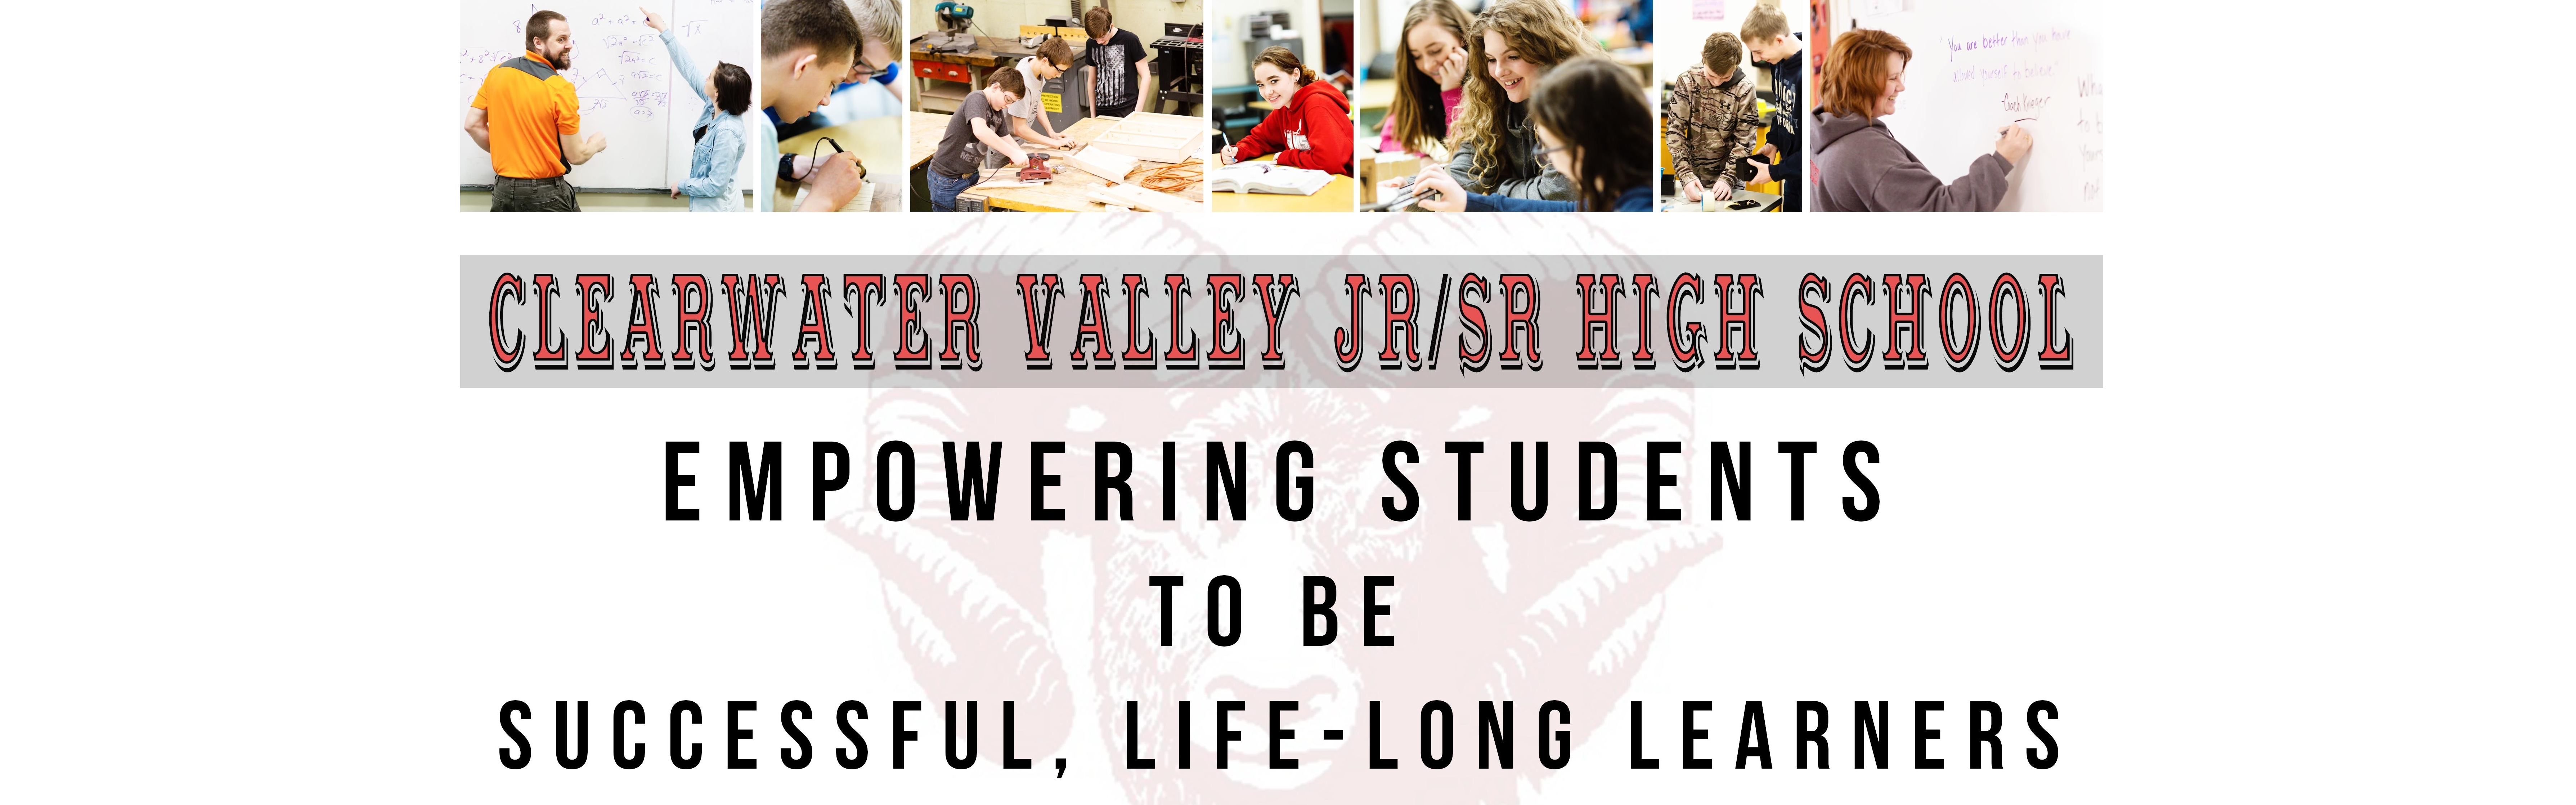 Our vison: empowering students to be life long learners